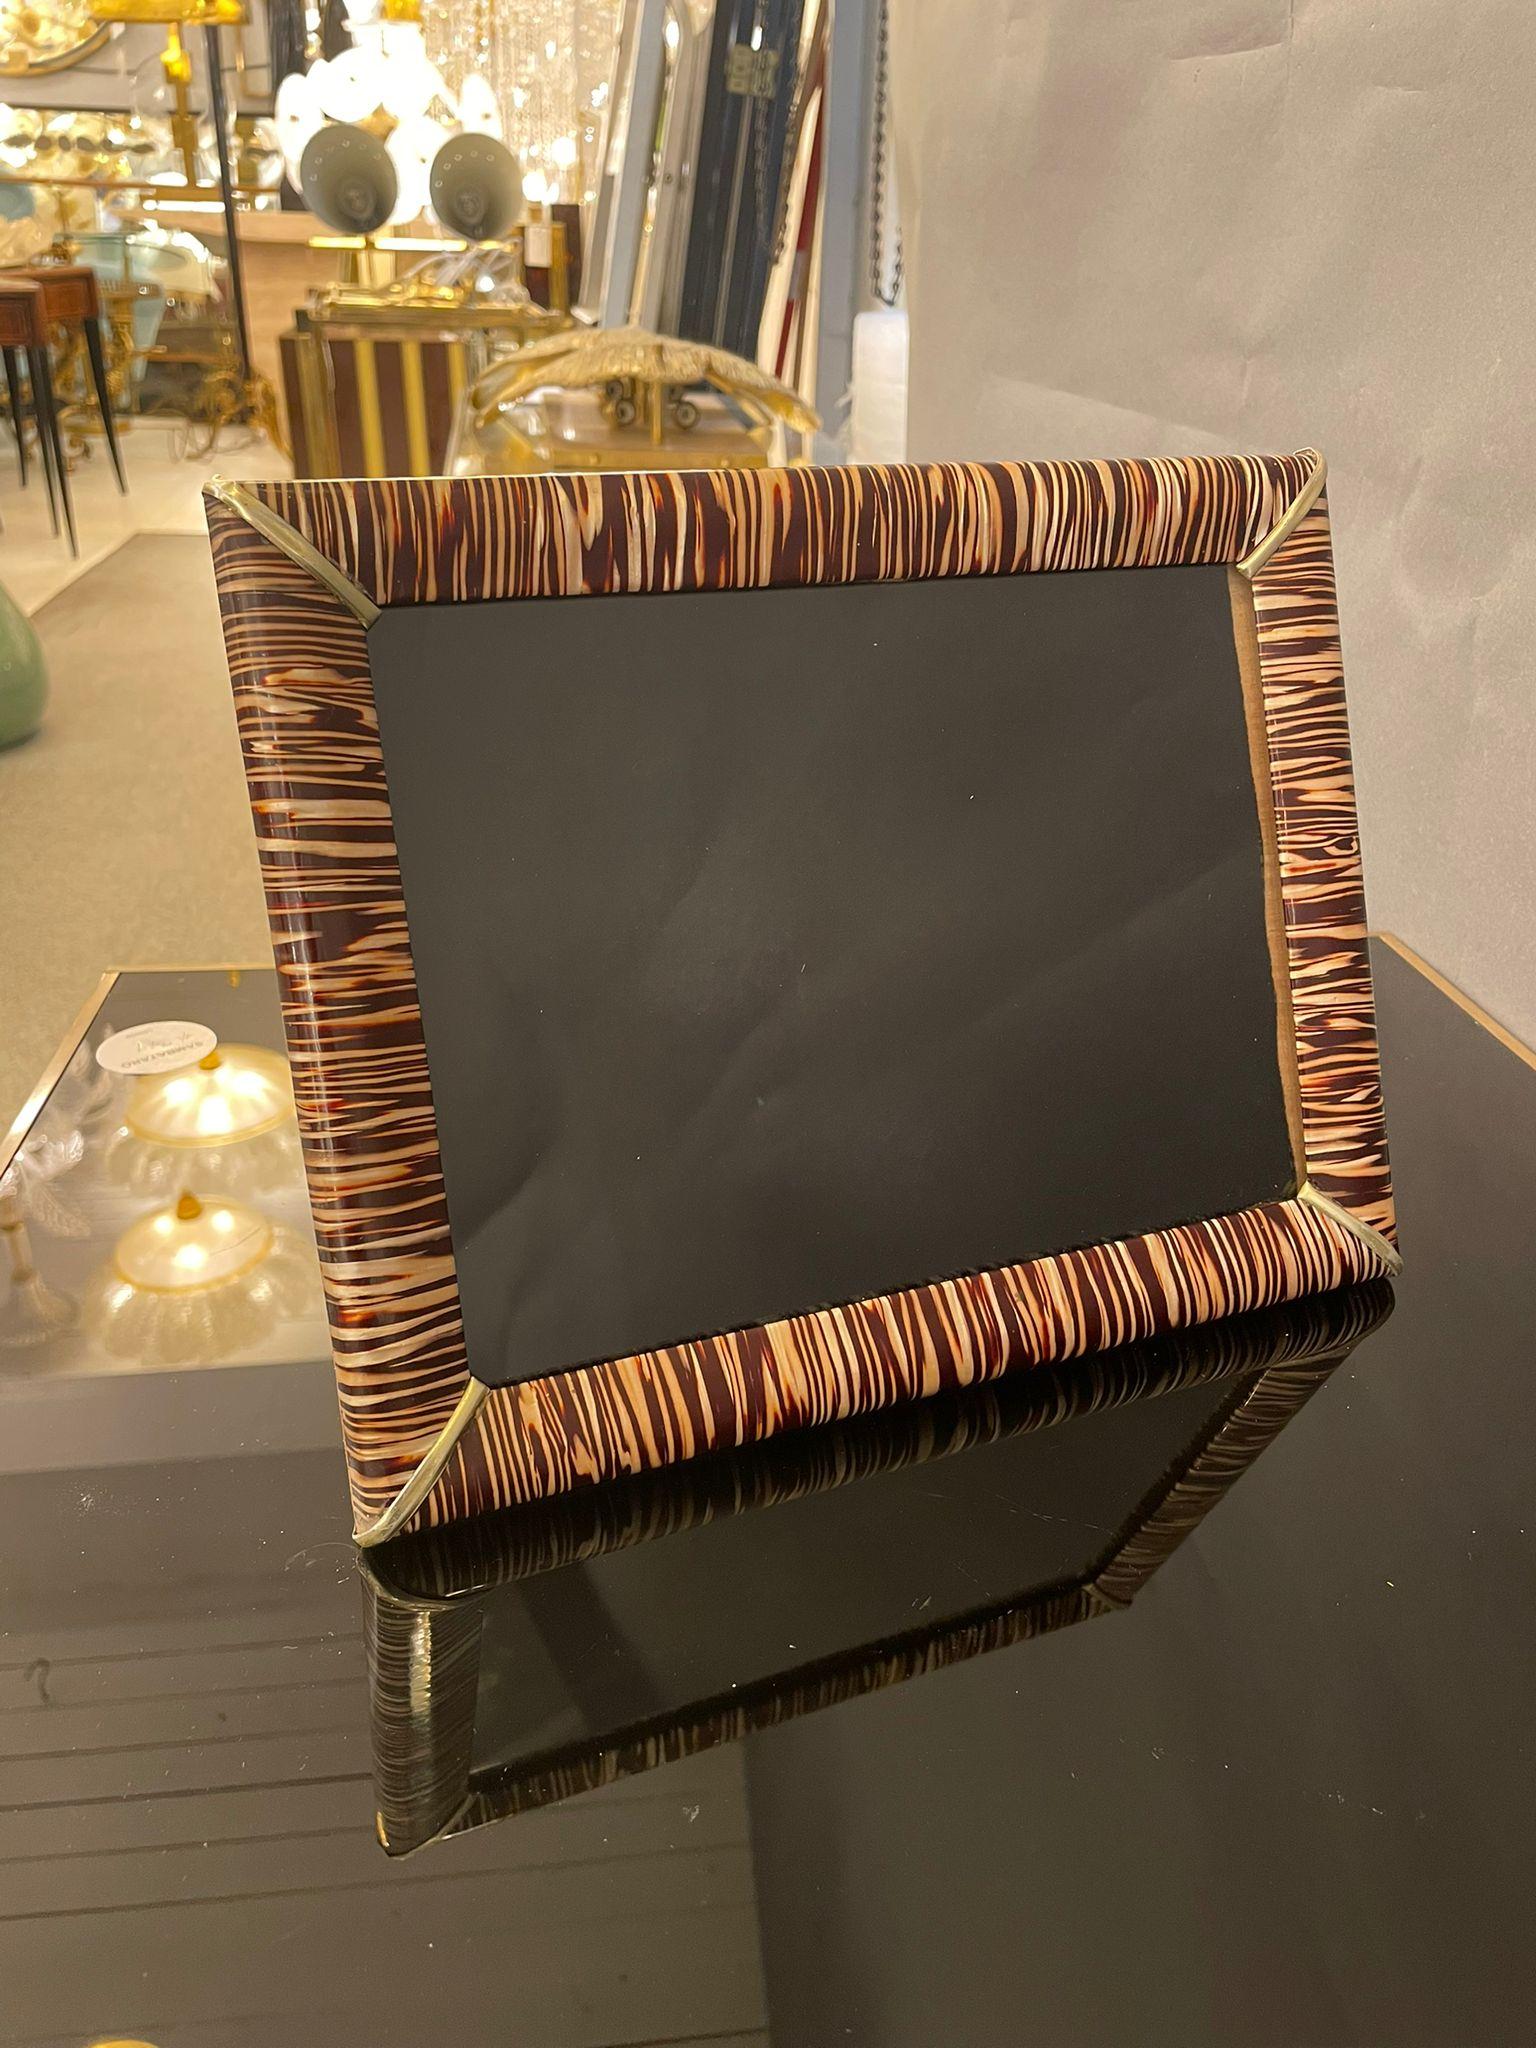 An elegant picture frame highly decorative with brown and ivory zebra stripes. It can be used horizontally and vertically. Italy 1960s.